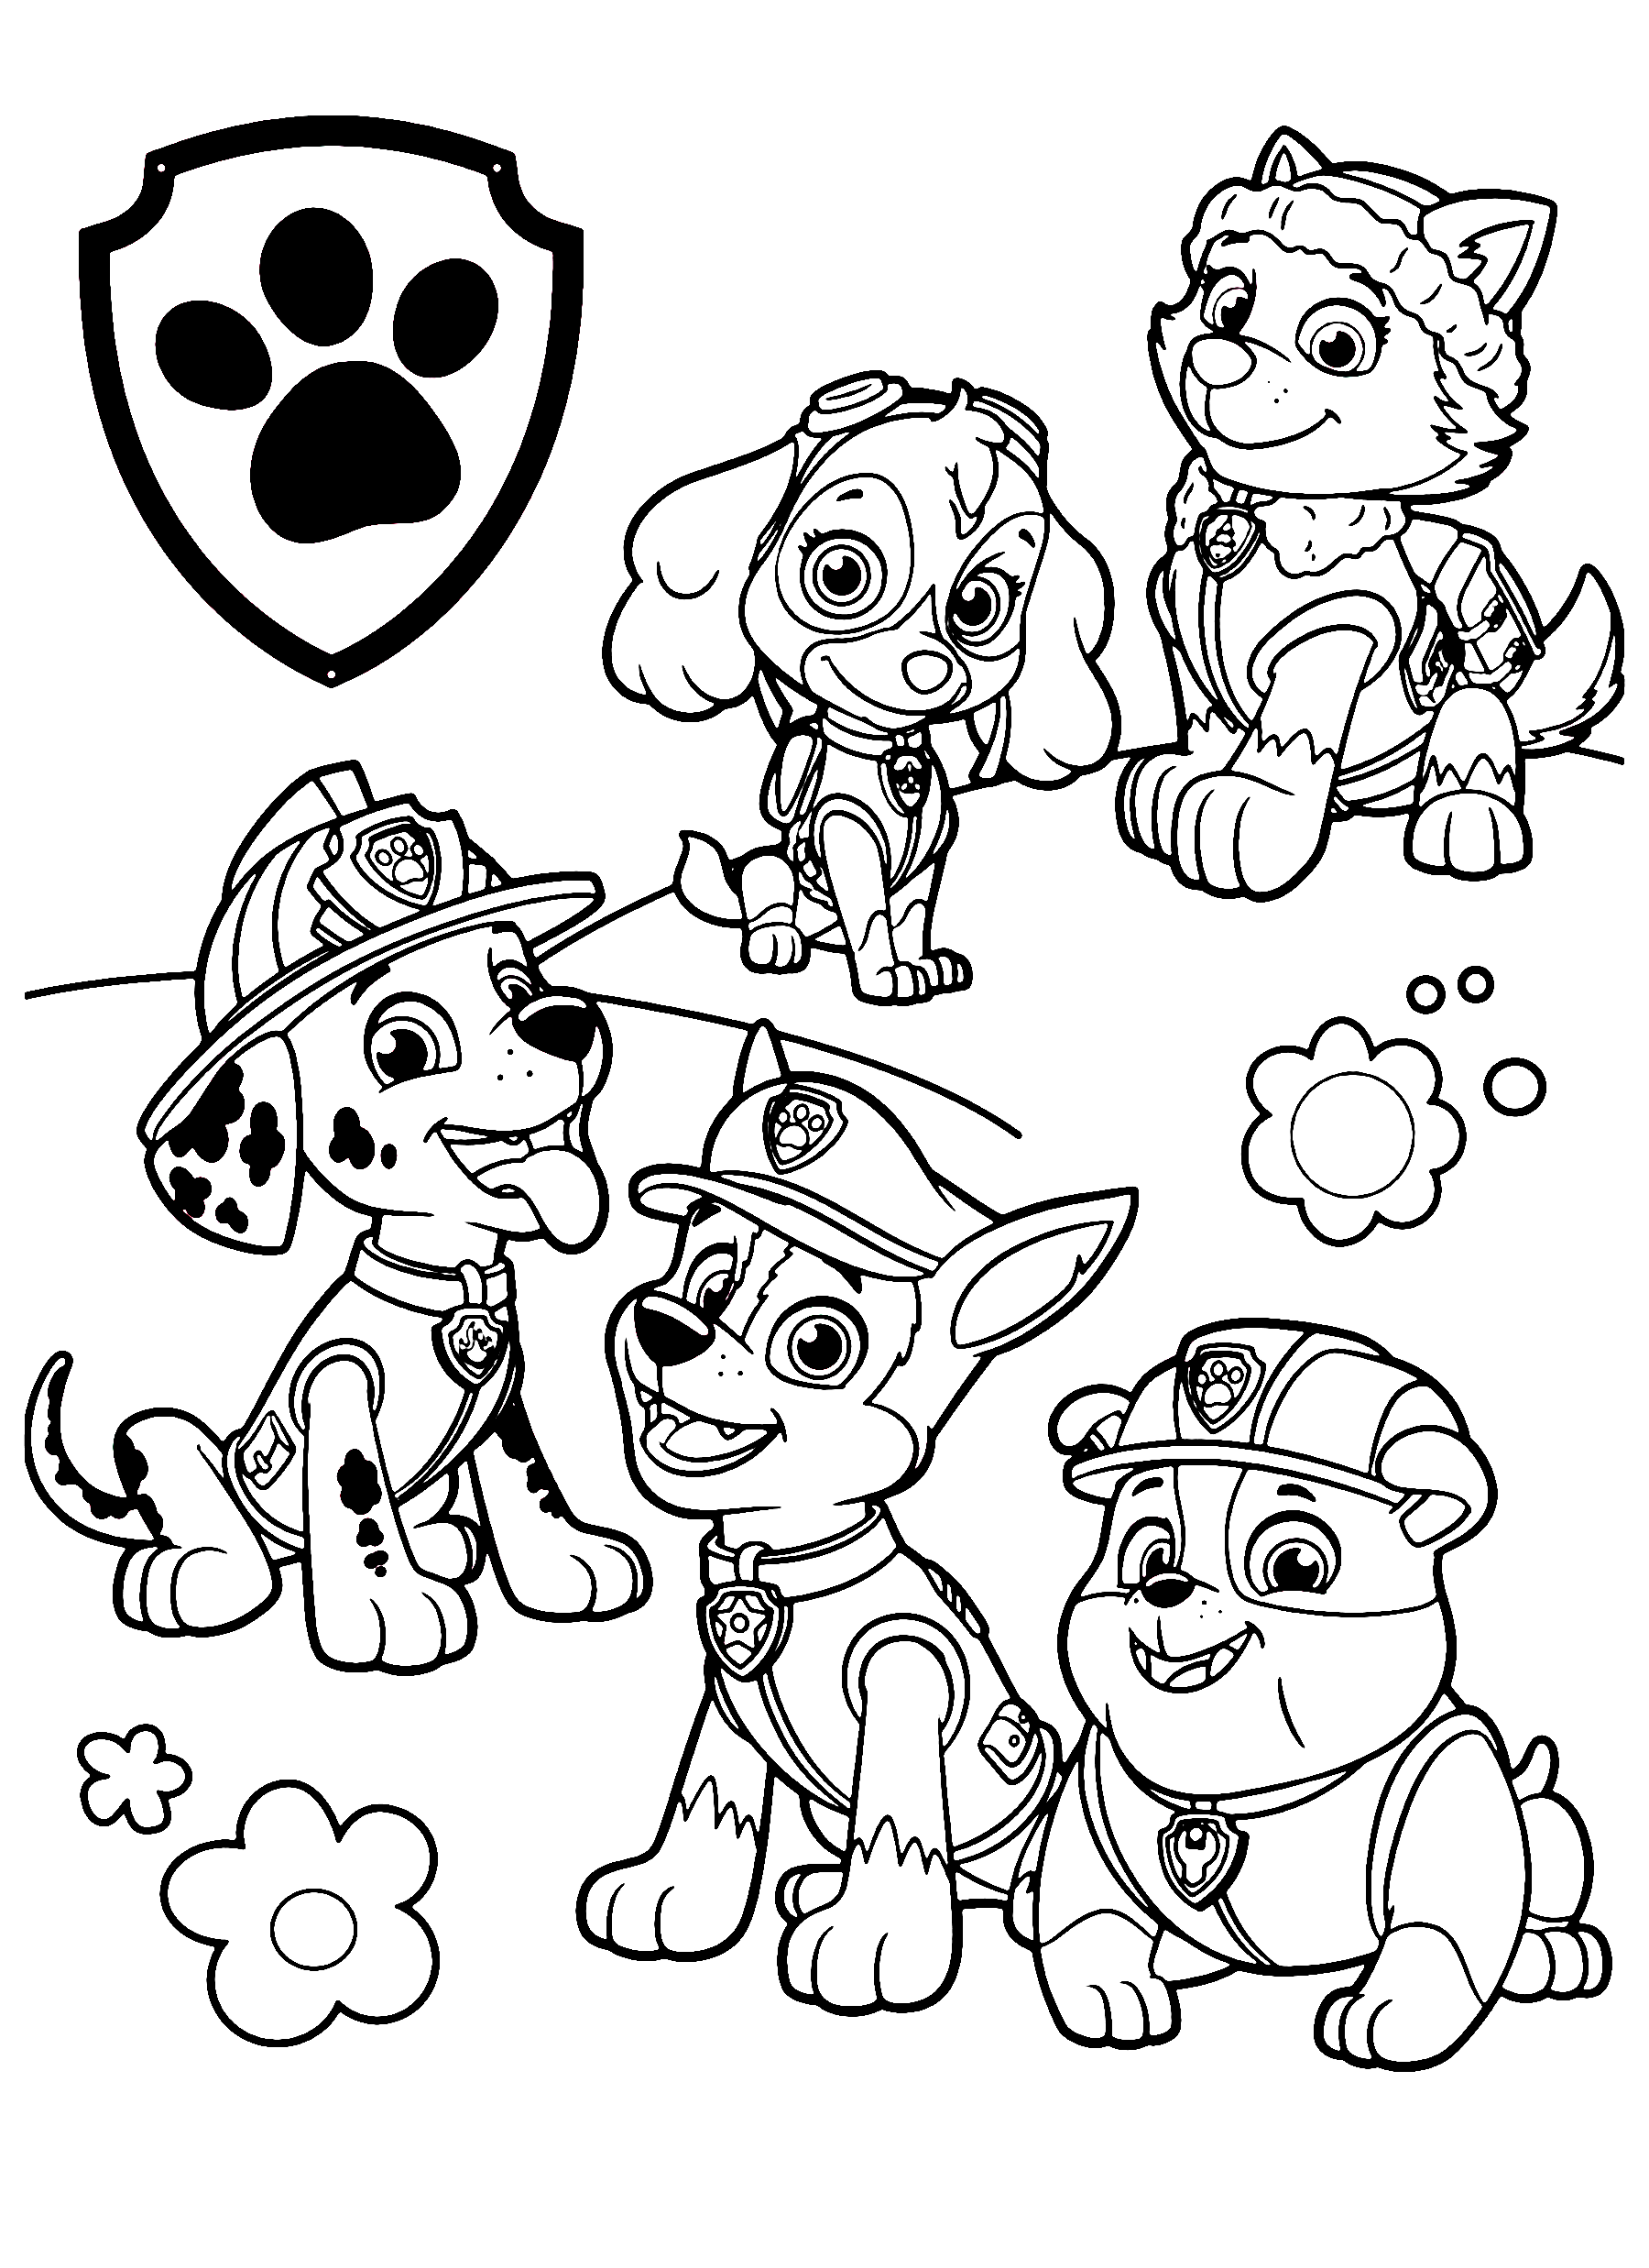 Paw Patrol All Pups Printable Coloring Page